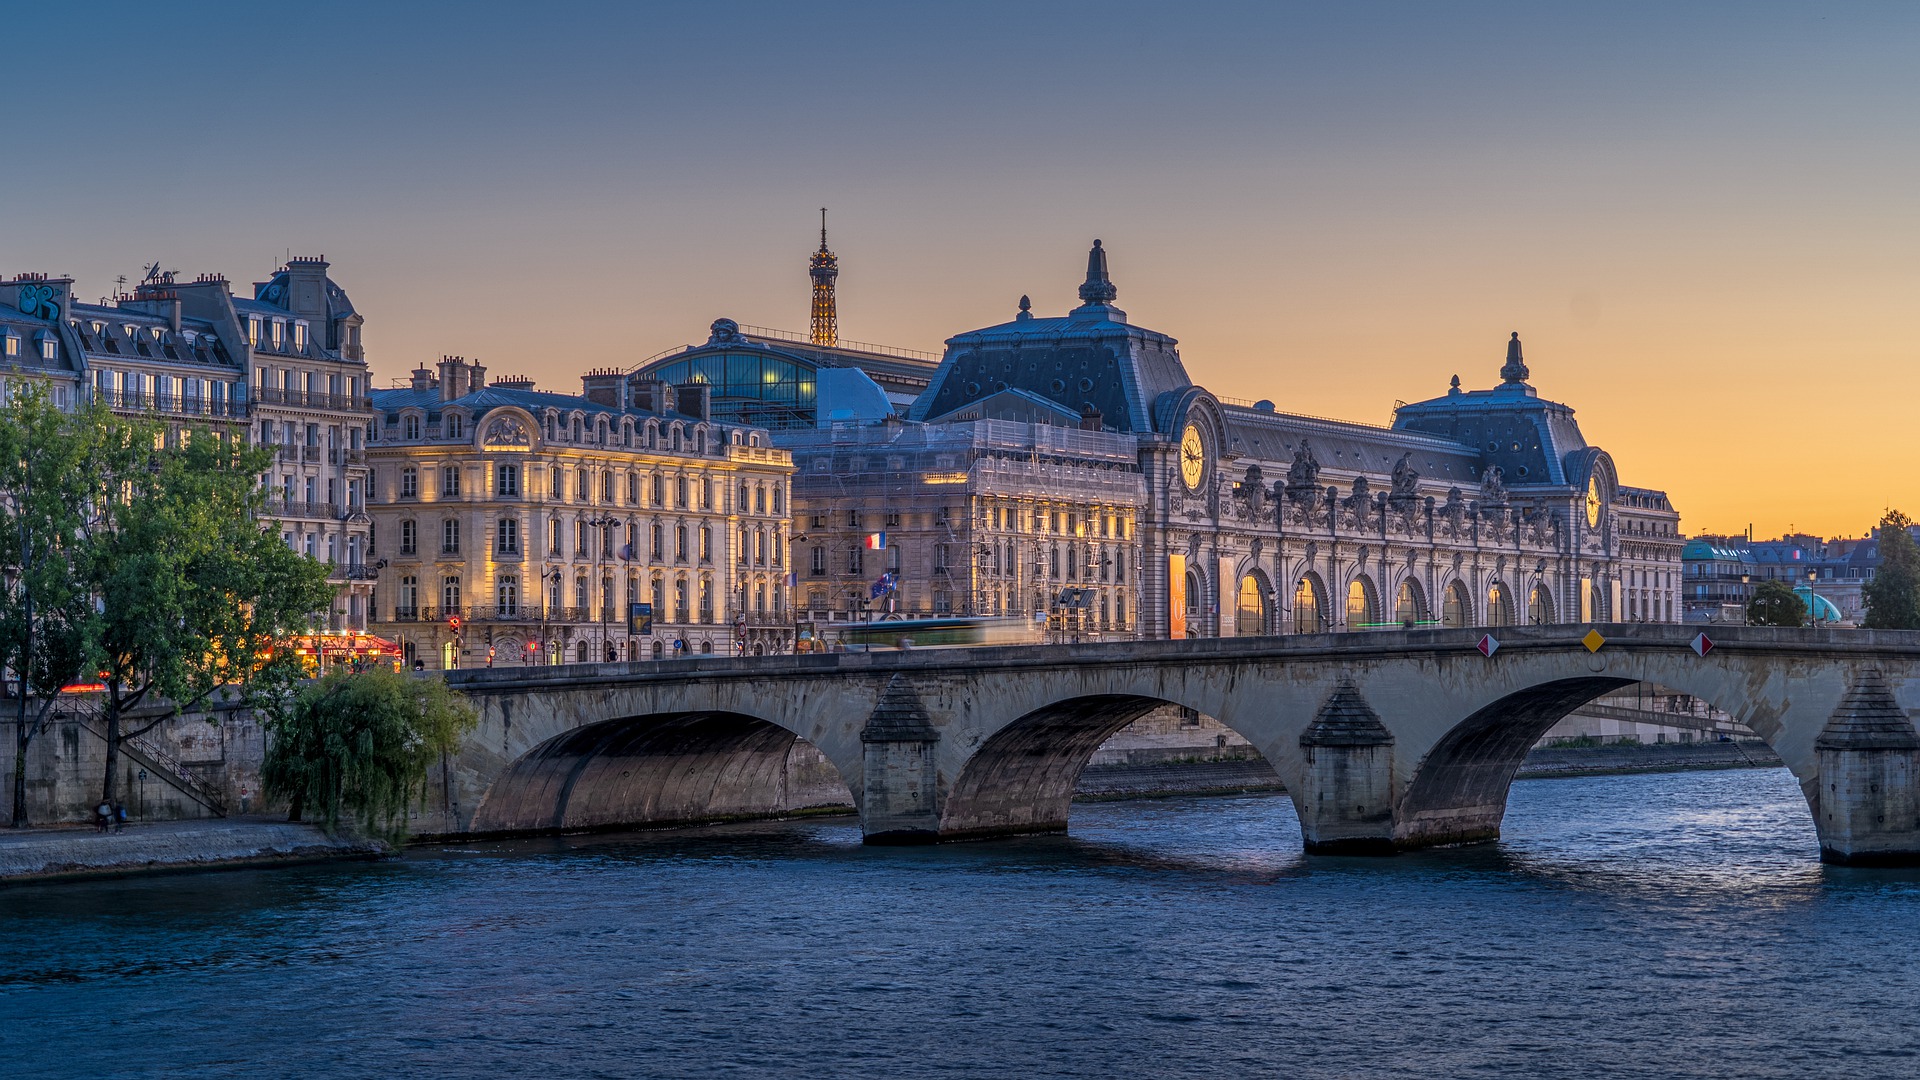 Paris - Discover the benefits of working with a travel agency when planning your trip. These are the top reasons to use a travel agent for your next vacation.